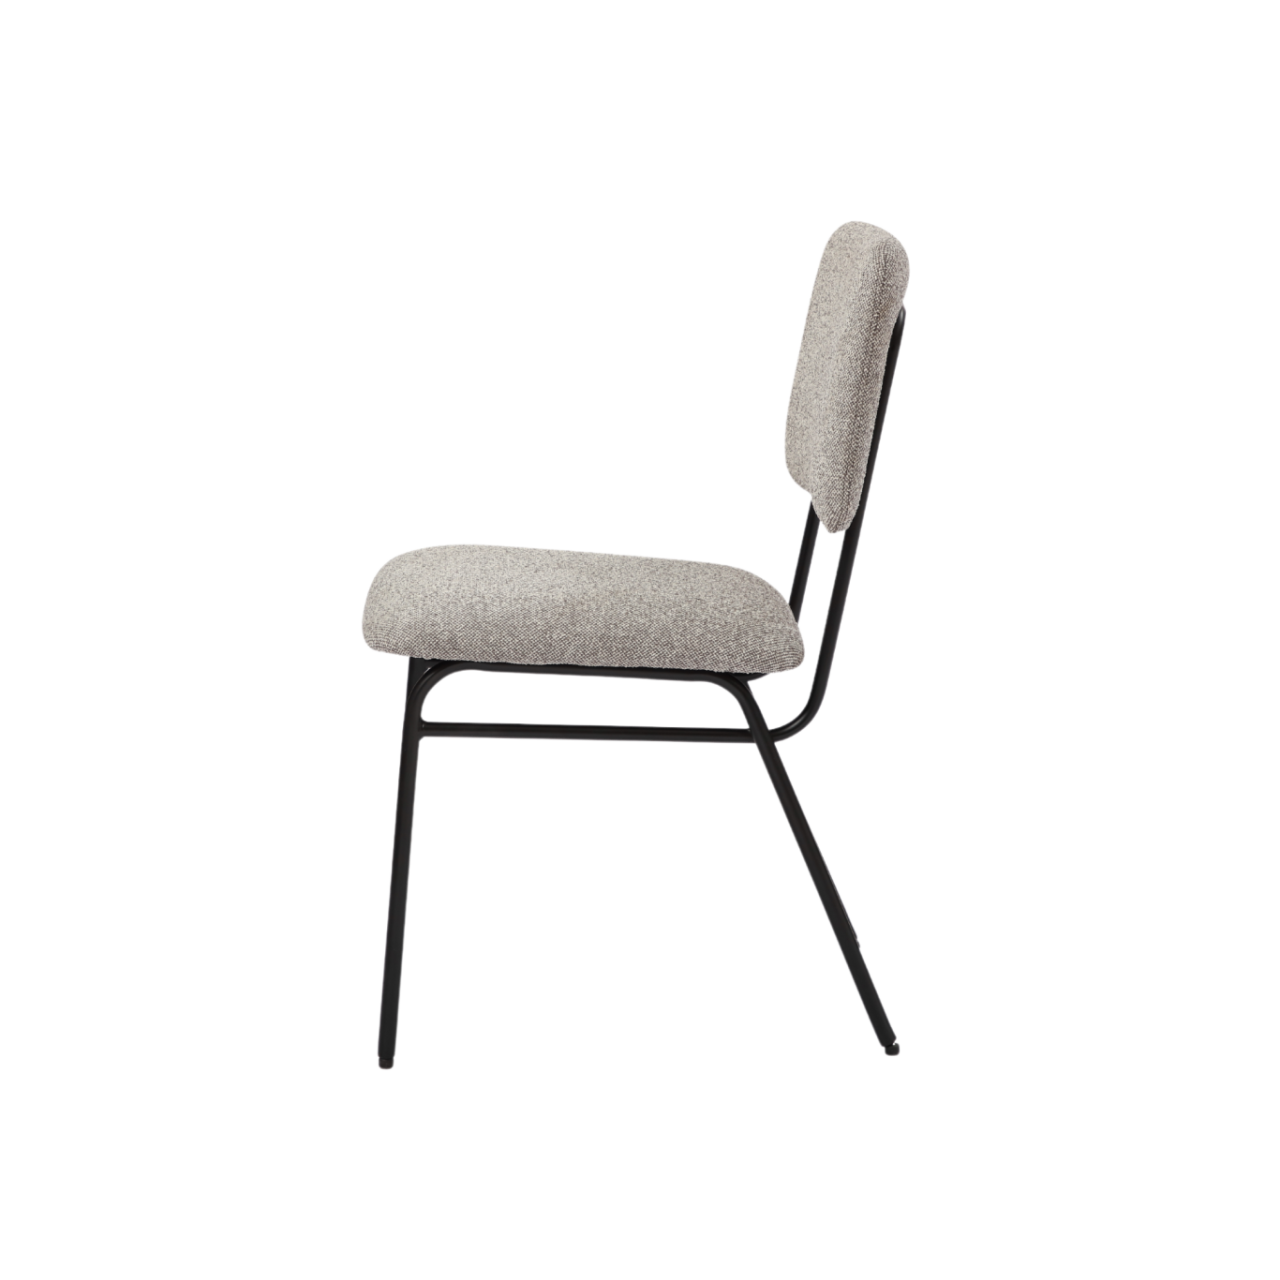 side view of padded industrial style dining chair